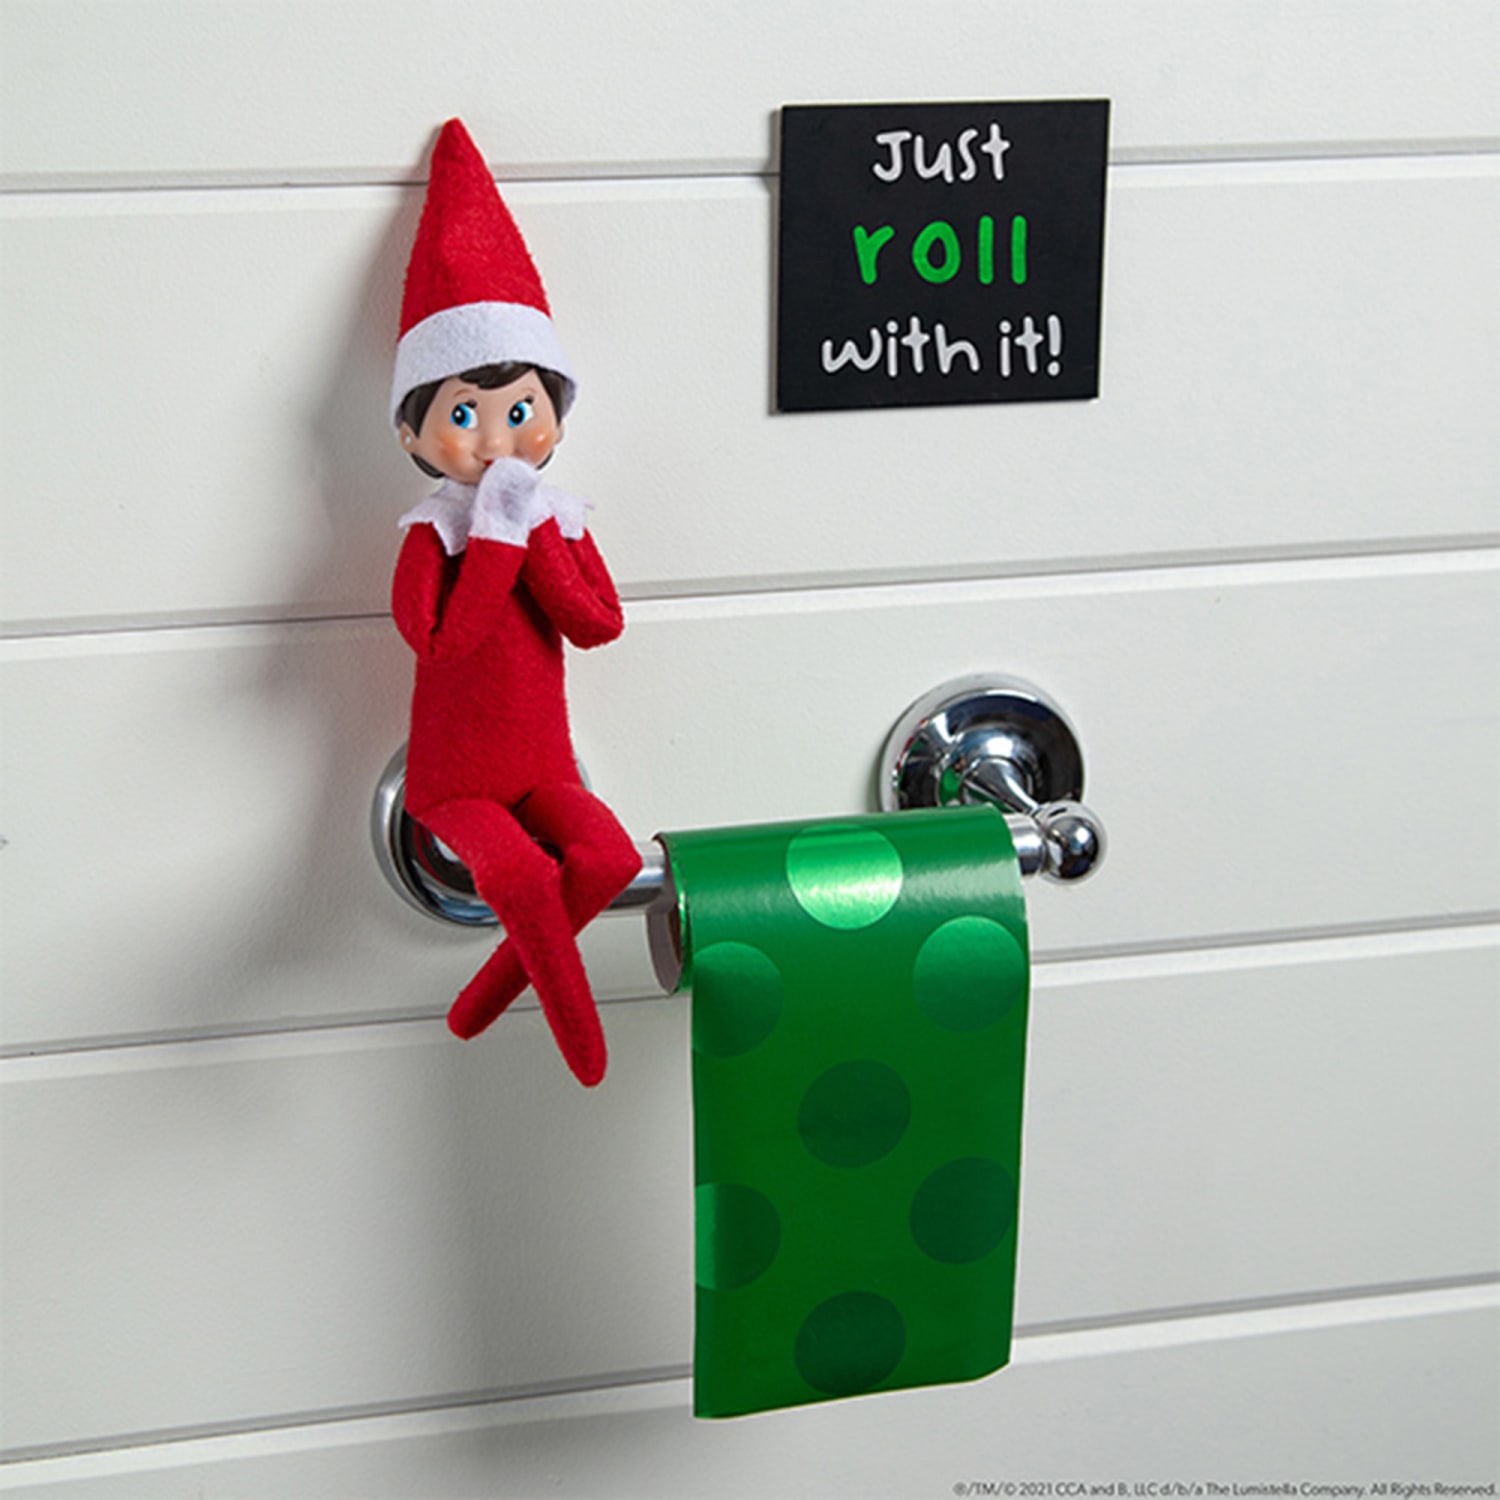 Introducing a Second Elf on the Shelf: Double the Fun, Double the Mischief!